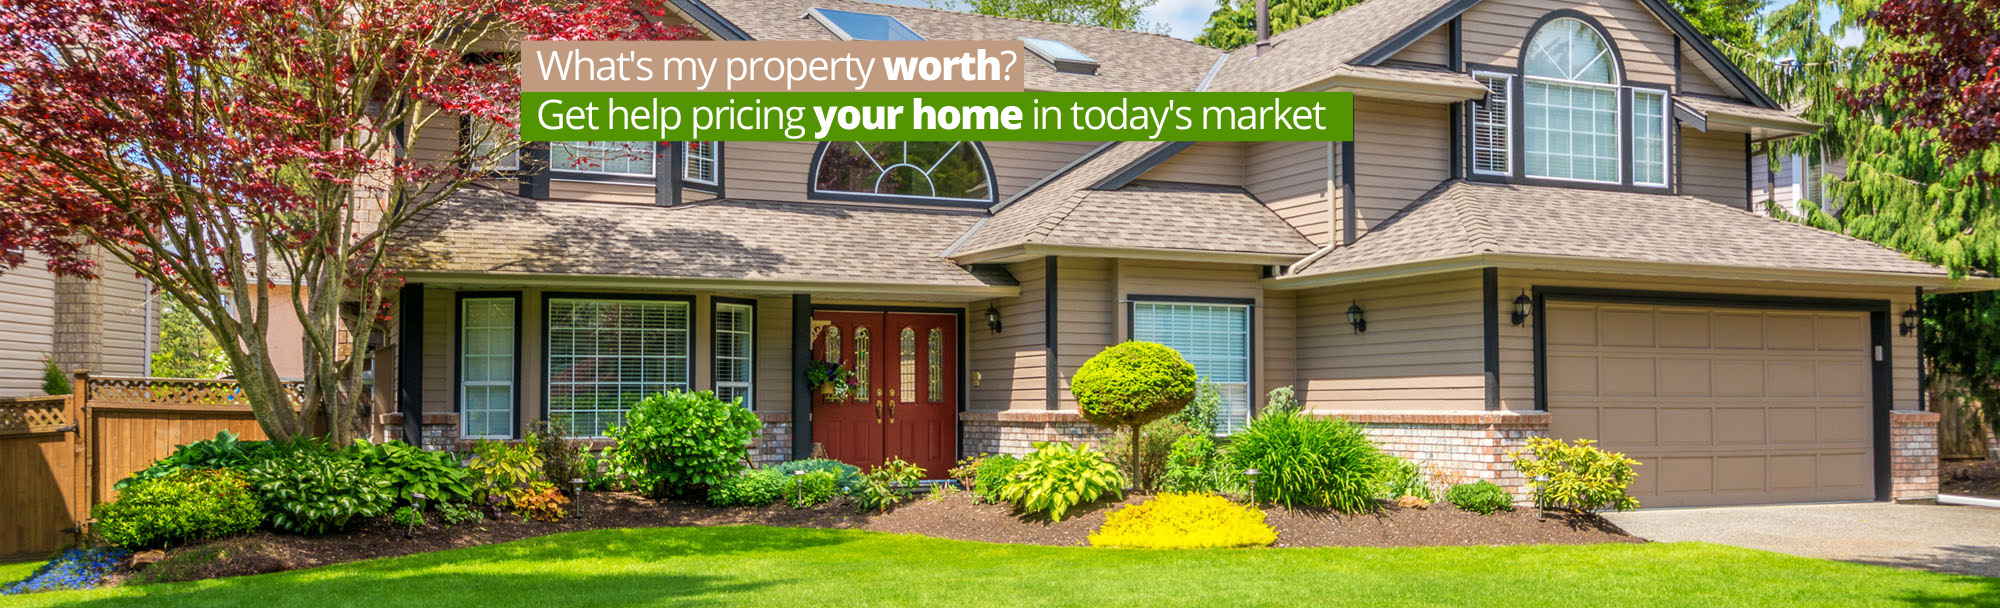 Find Out What Your Home is Worth: Get a Free Home Evaluation!